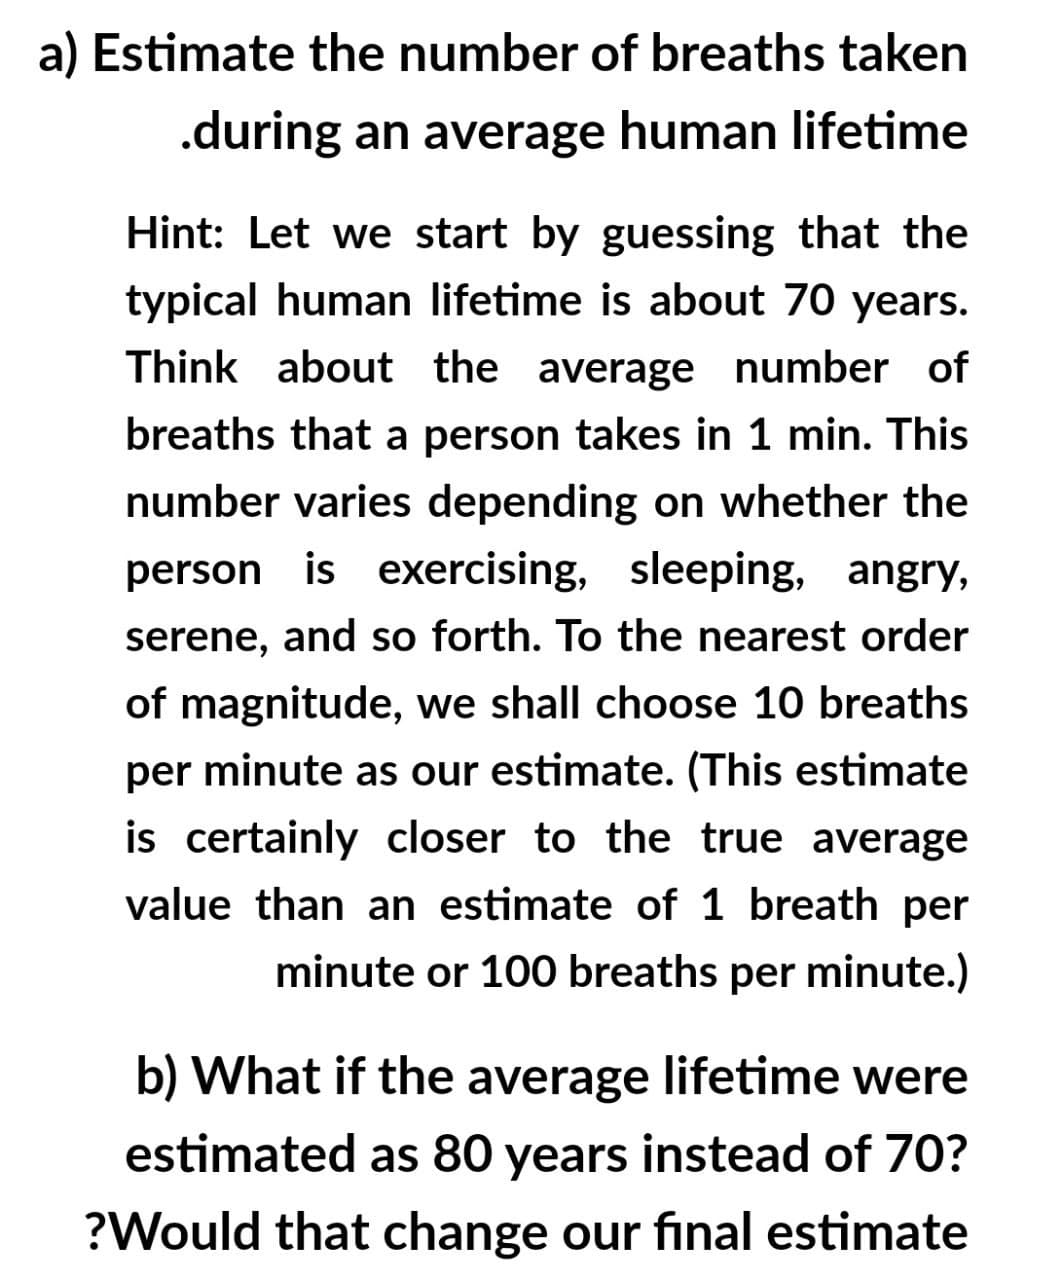 a) Estimate the number of breaths taken
.during an average human lifetime
Hint: Let we start by guessing that the
typical human lifetime is about 70 years.
Think about the average number of
breaths that a person takes in 1 min. This
number varies depending on whether the
person is exercising, sleeping, angry,
serene, and so forth. To the nearest order
of magnitude, we shall choose 10 breaths
per minute as our estimate. (This estimate
is certainly closer to the true average
value than an estimate of 1 breath per
minute or 100 breaths per minute.)
b) What if the average lifetime were
estimated as 80 years instead of 70?
?Would that change our final estimate
